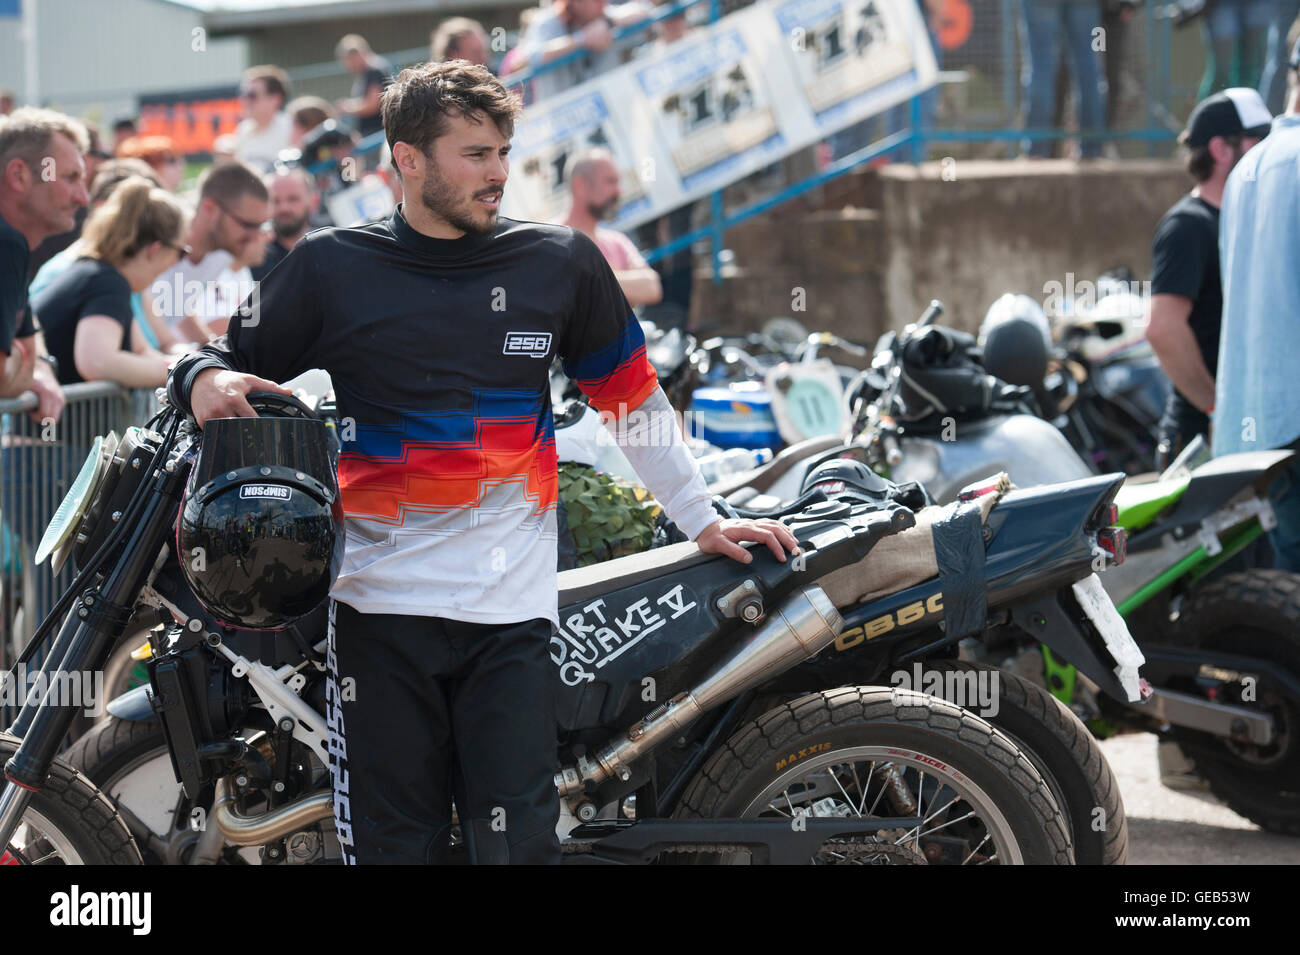 Kings Lynn, Norfolk, United Kingdom. 16.07.2016. Fifth annual Dirt Quake festival with Guy Martin and Carl 'Foggy' Fogarty. Racers wait in the pits to be called. Stock Photo